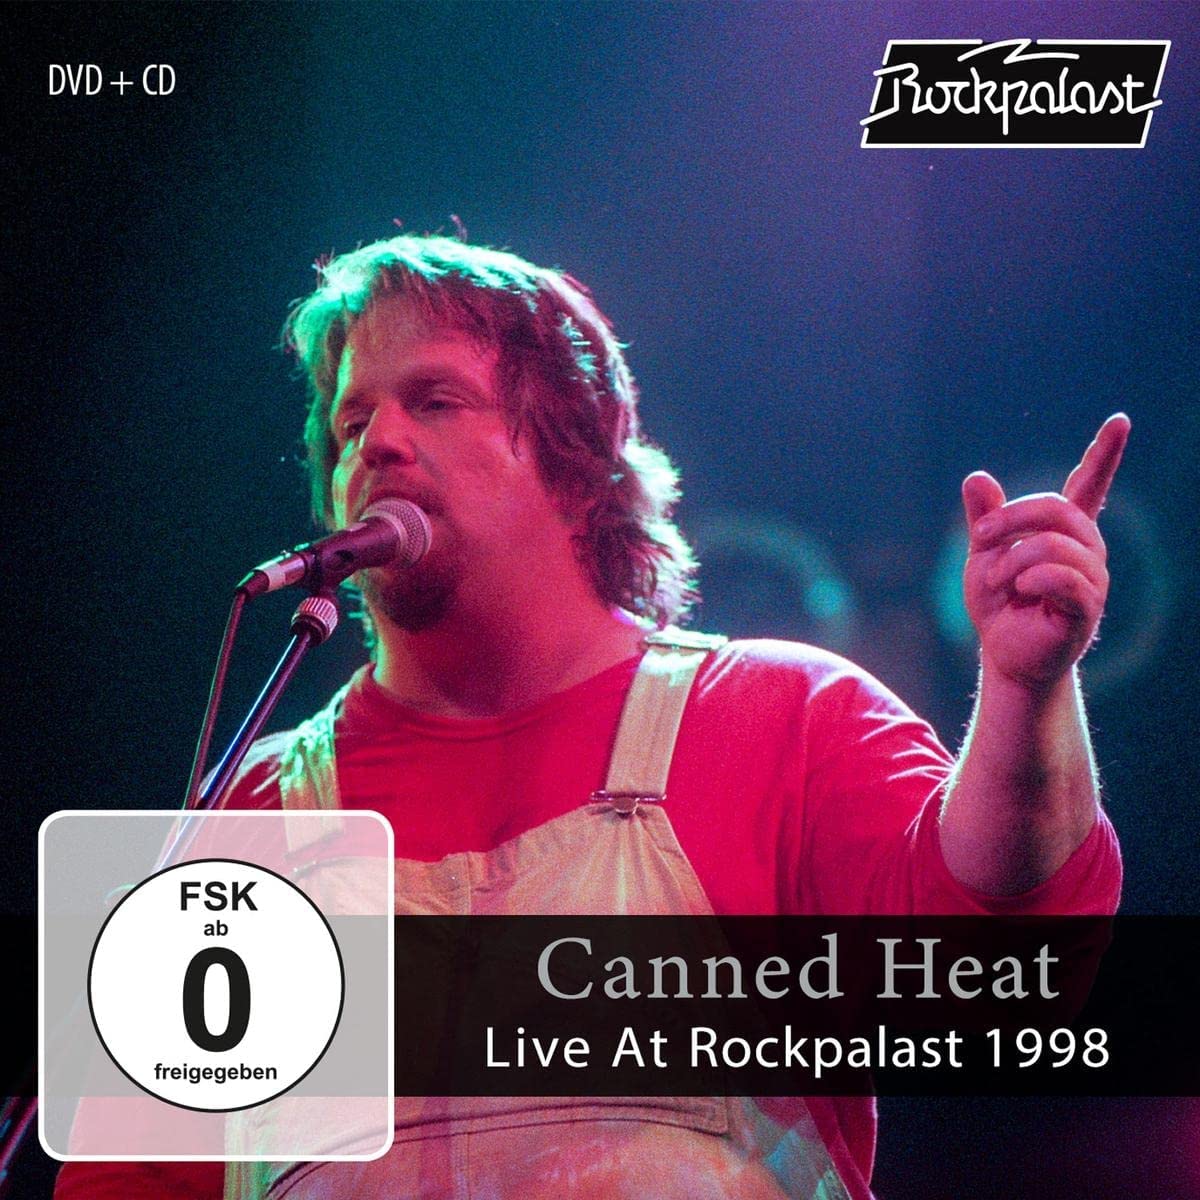 CANNED HEAT - Live At Rockpalast 1998